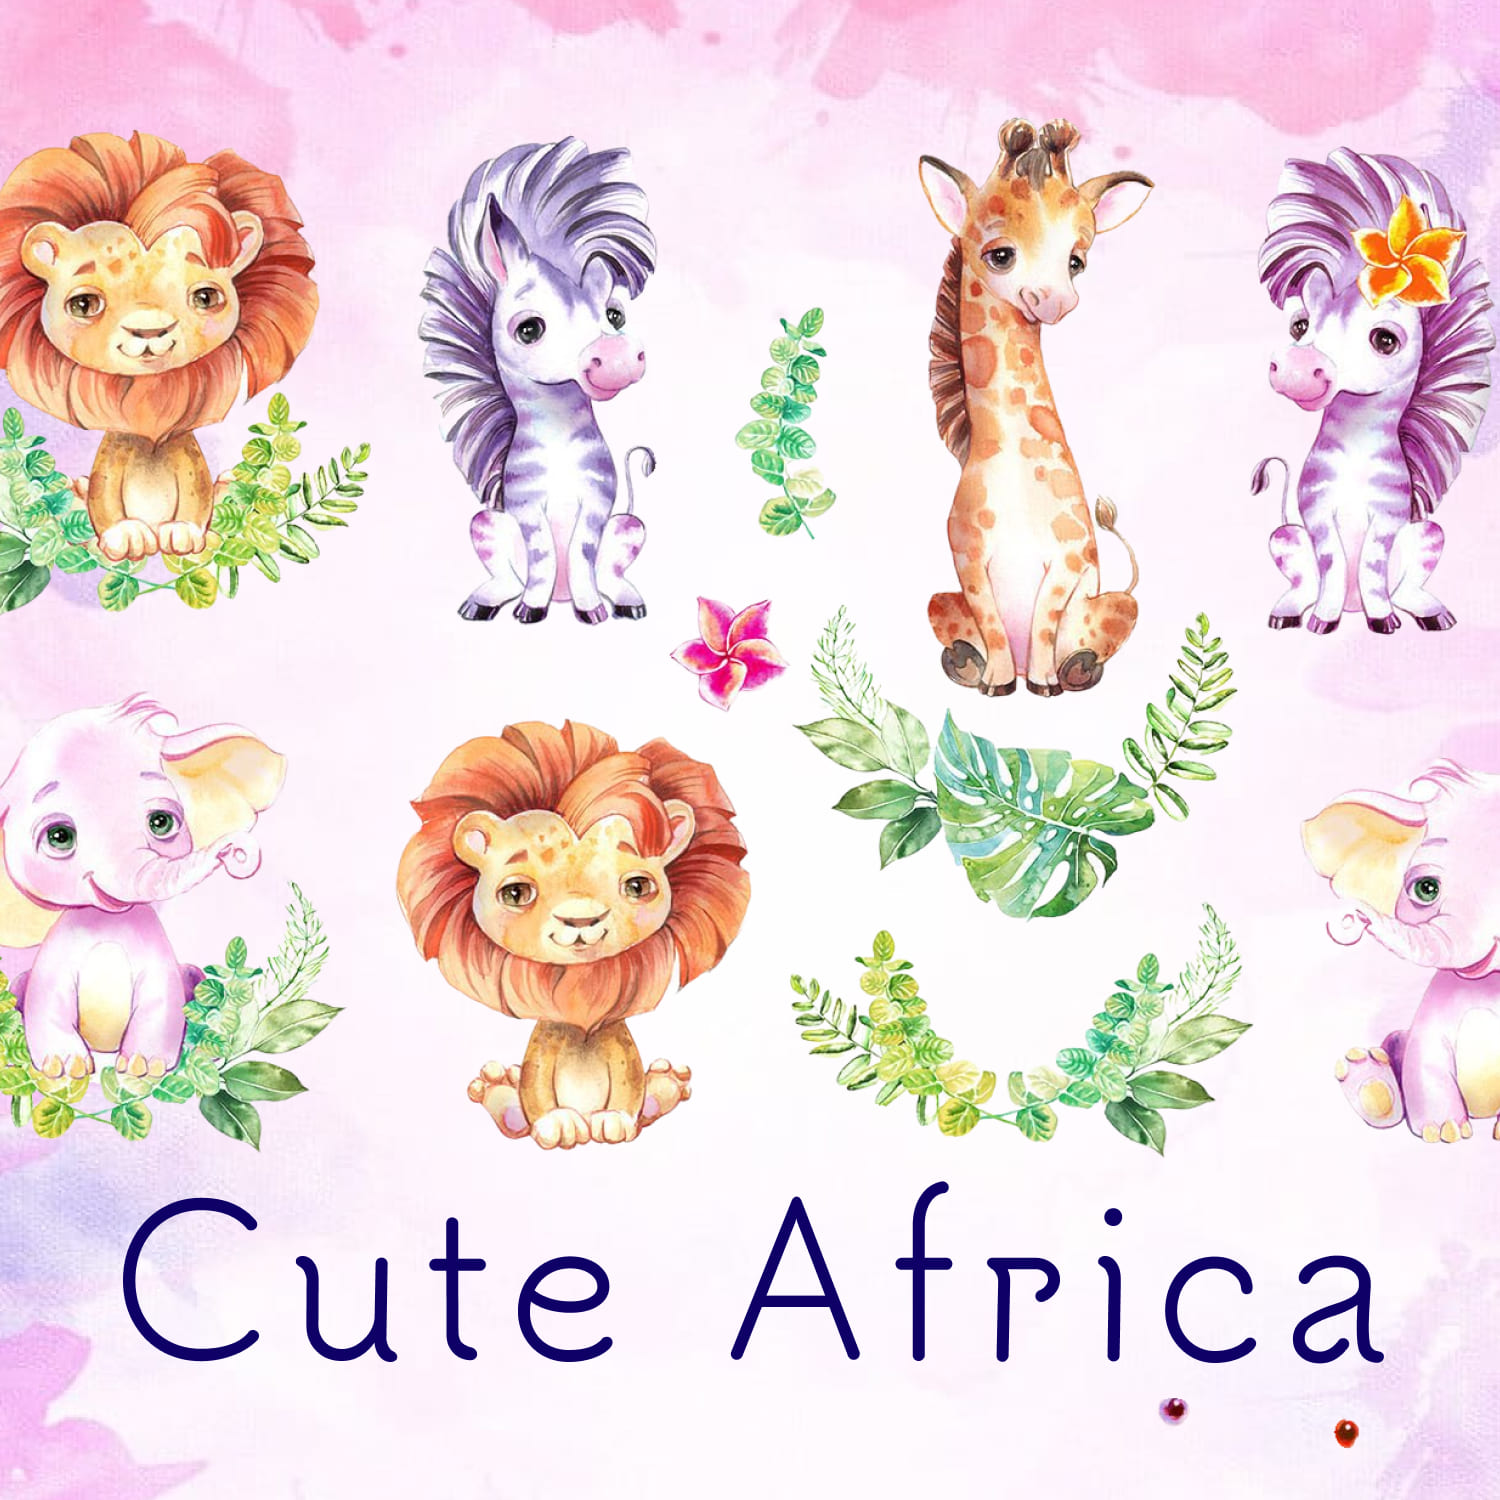 Cute Africa patterns & elements.